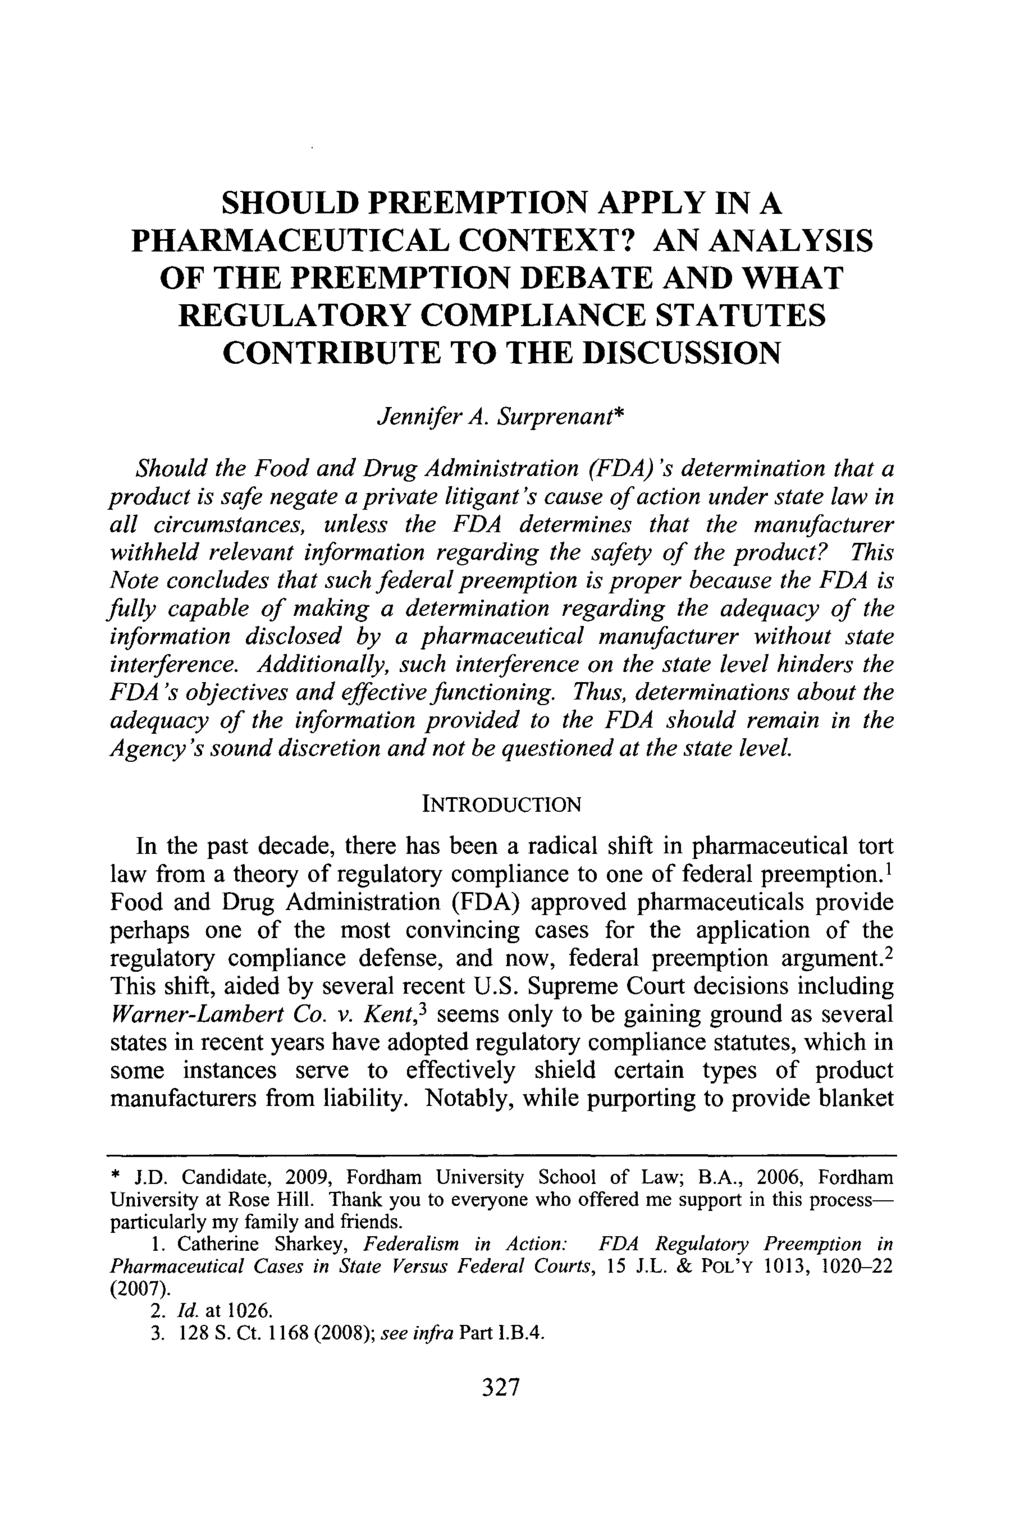 SHOULD PREEMPTION APPLY IN A PHARMACEUTICAL CONTEXT? AN ANALYSIS OF THE PREEMPTION DEBATE AND WHAT REGULATORY COMPLIANCE STATUTES CONTRIBUTE TO THE DISCUSSION Jennifer A.